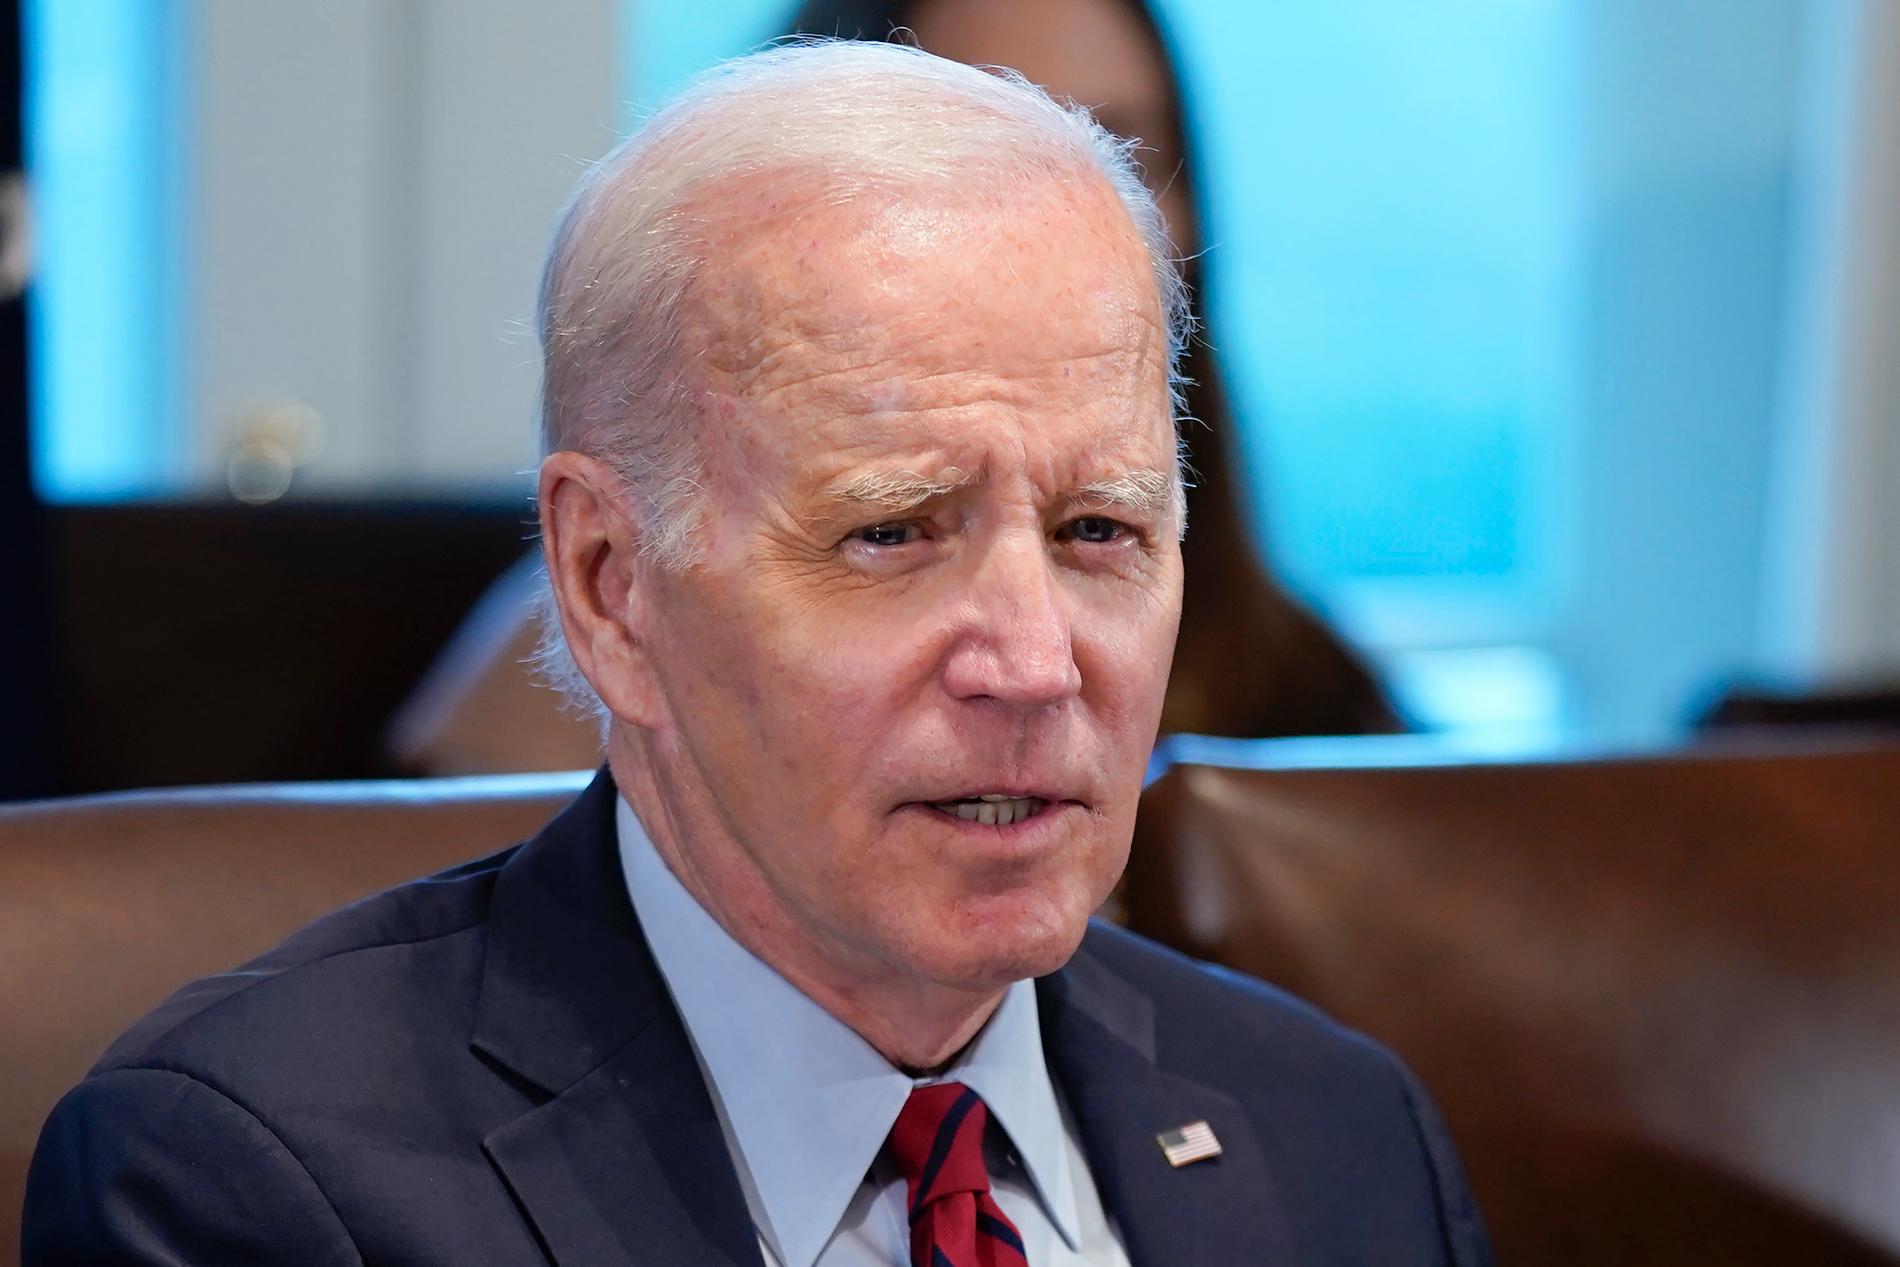 Several classified documents have been found on Biden’s property